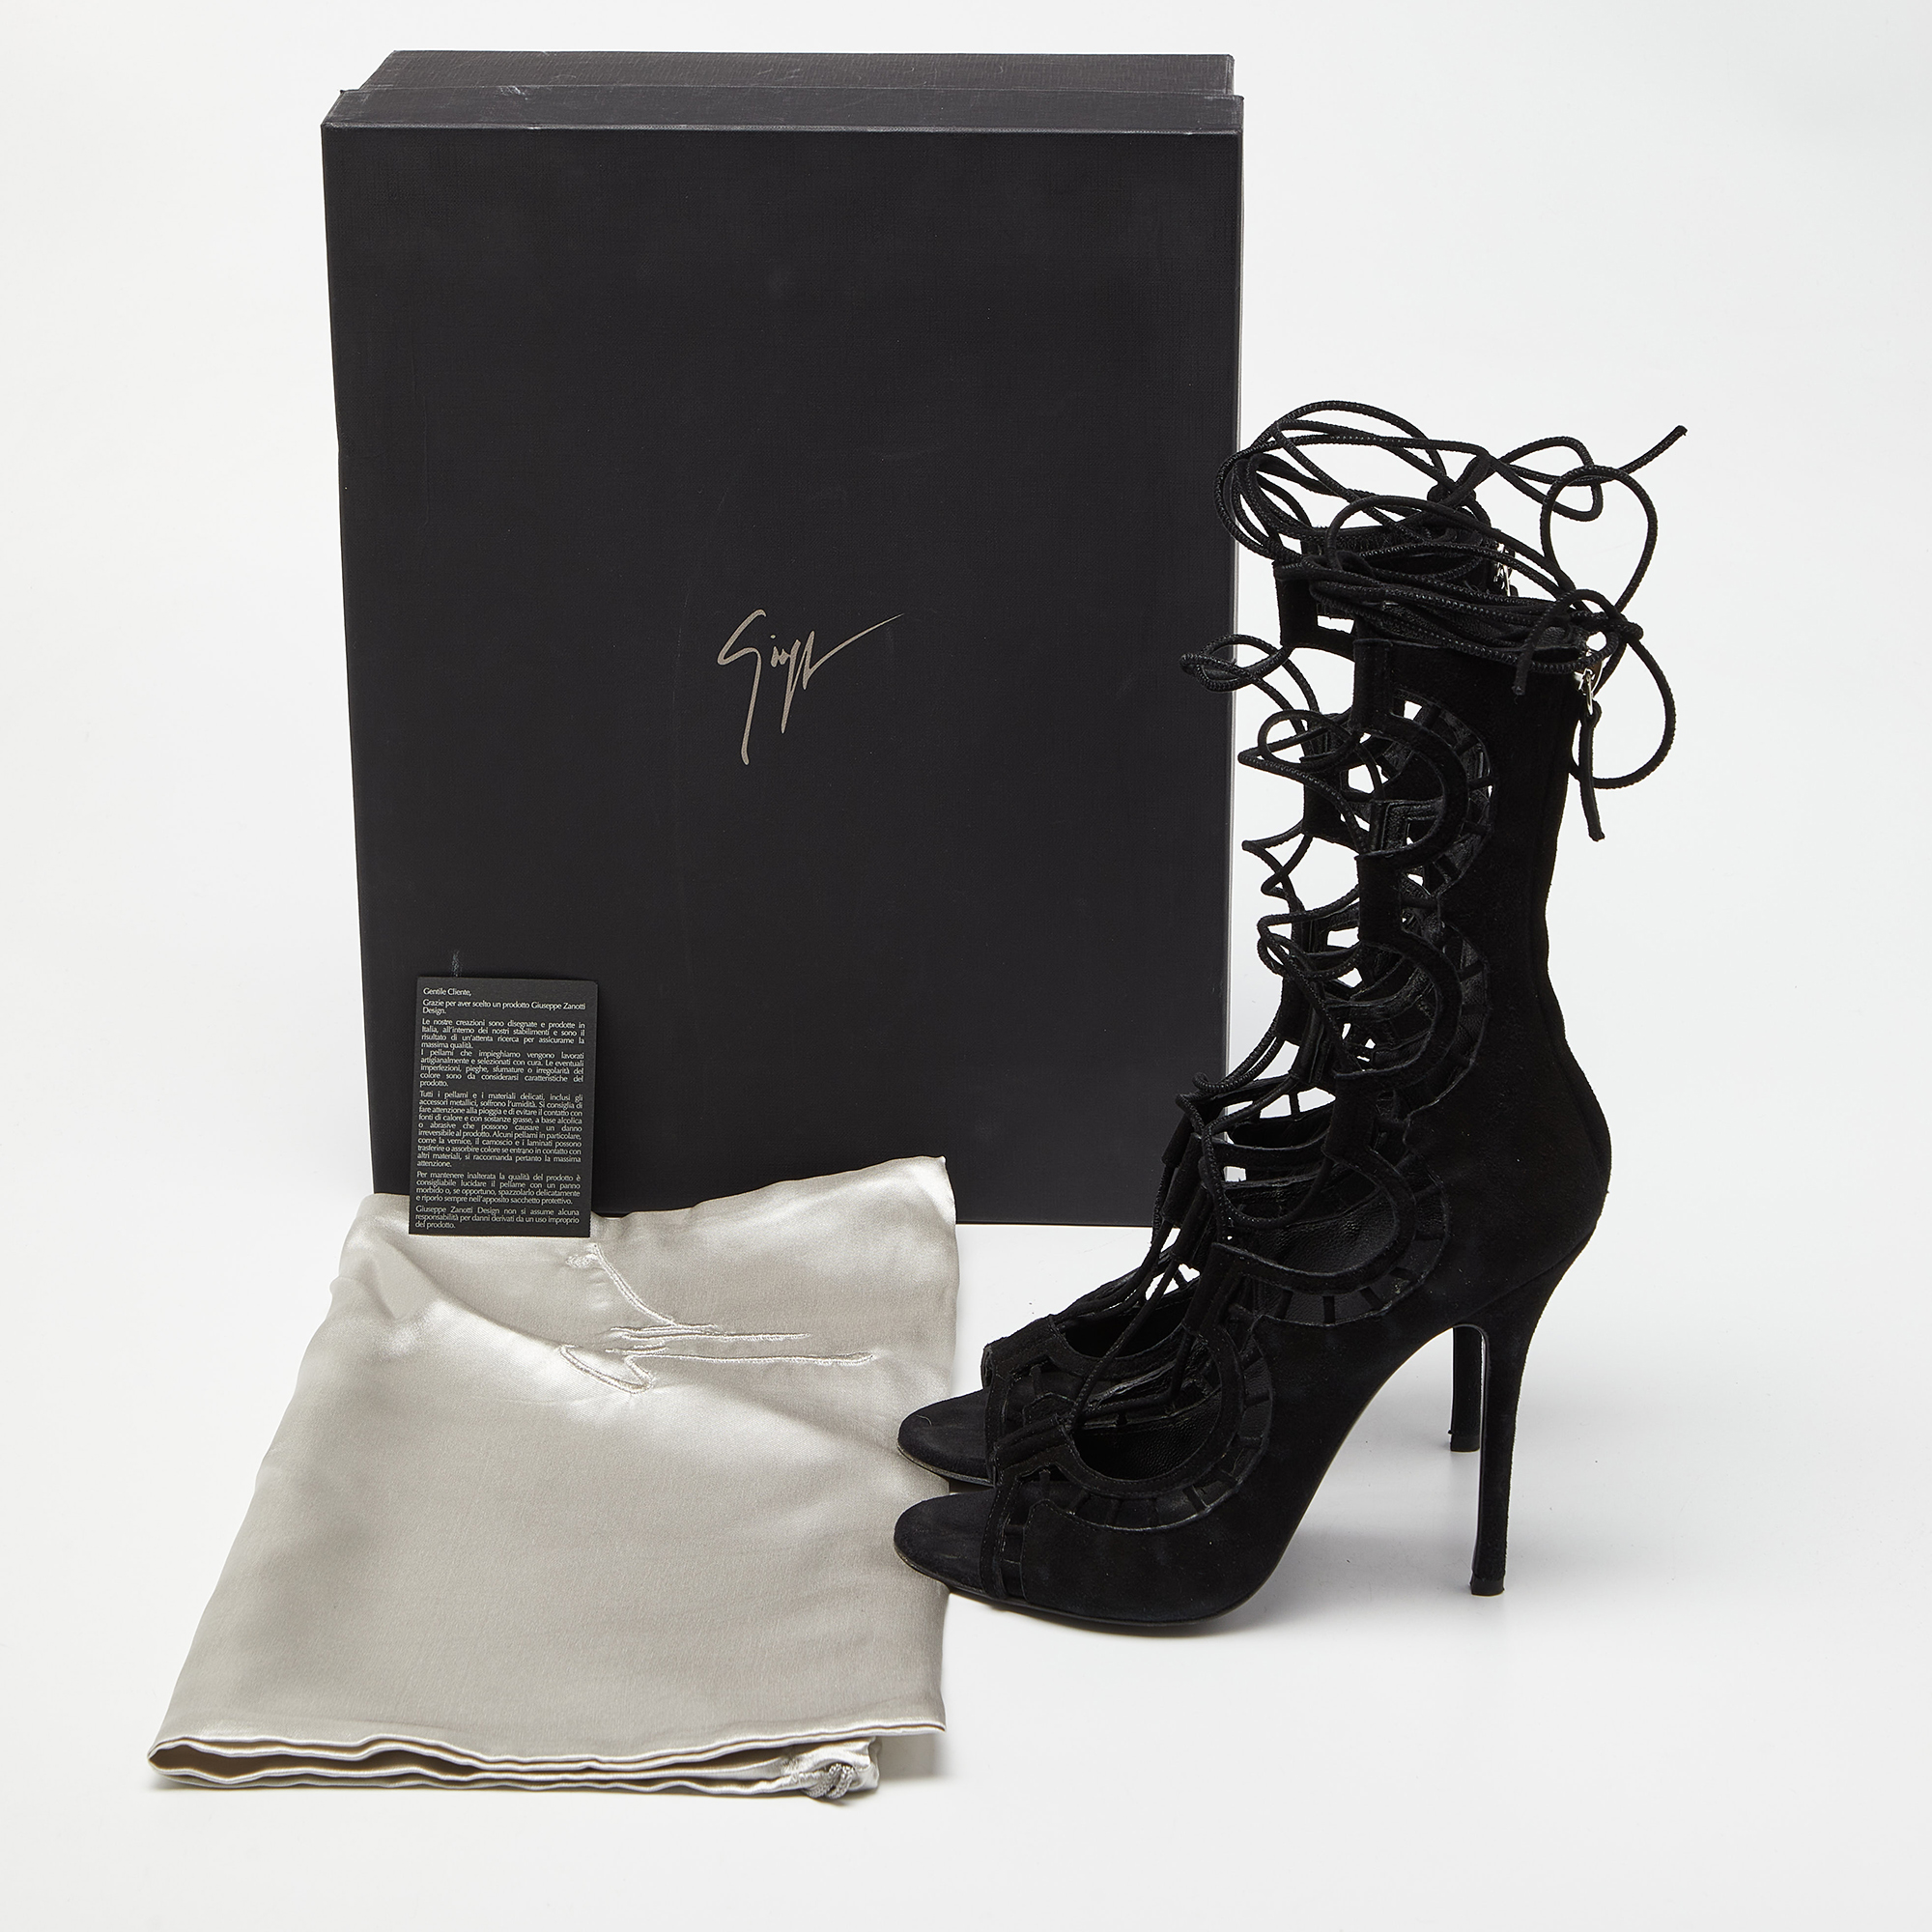 Giuseppe Zanotti Black Suede Cut Out Strappy High Peep Toe Sandals Size 37